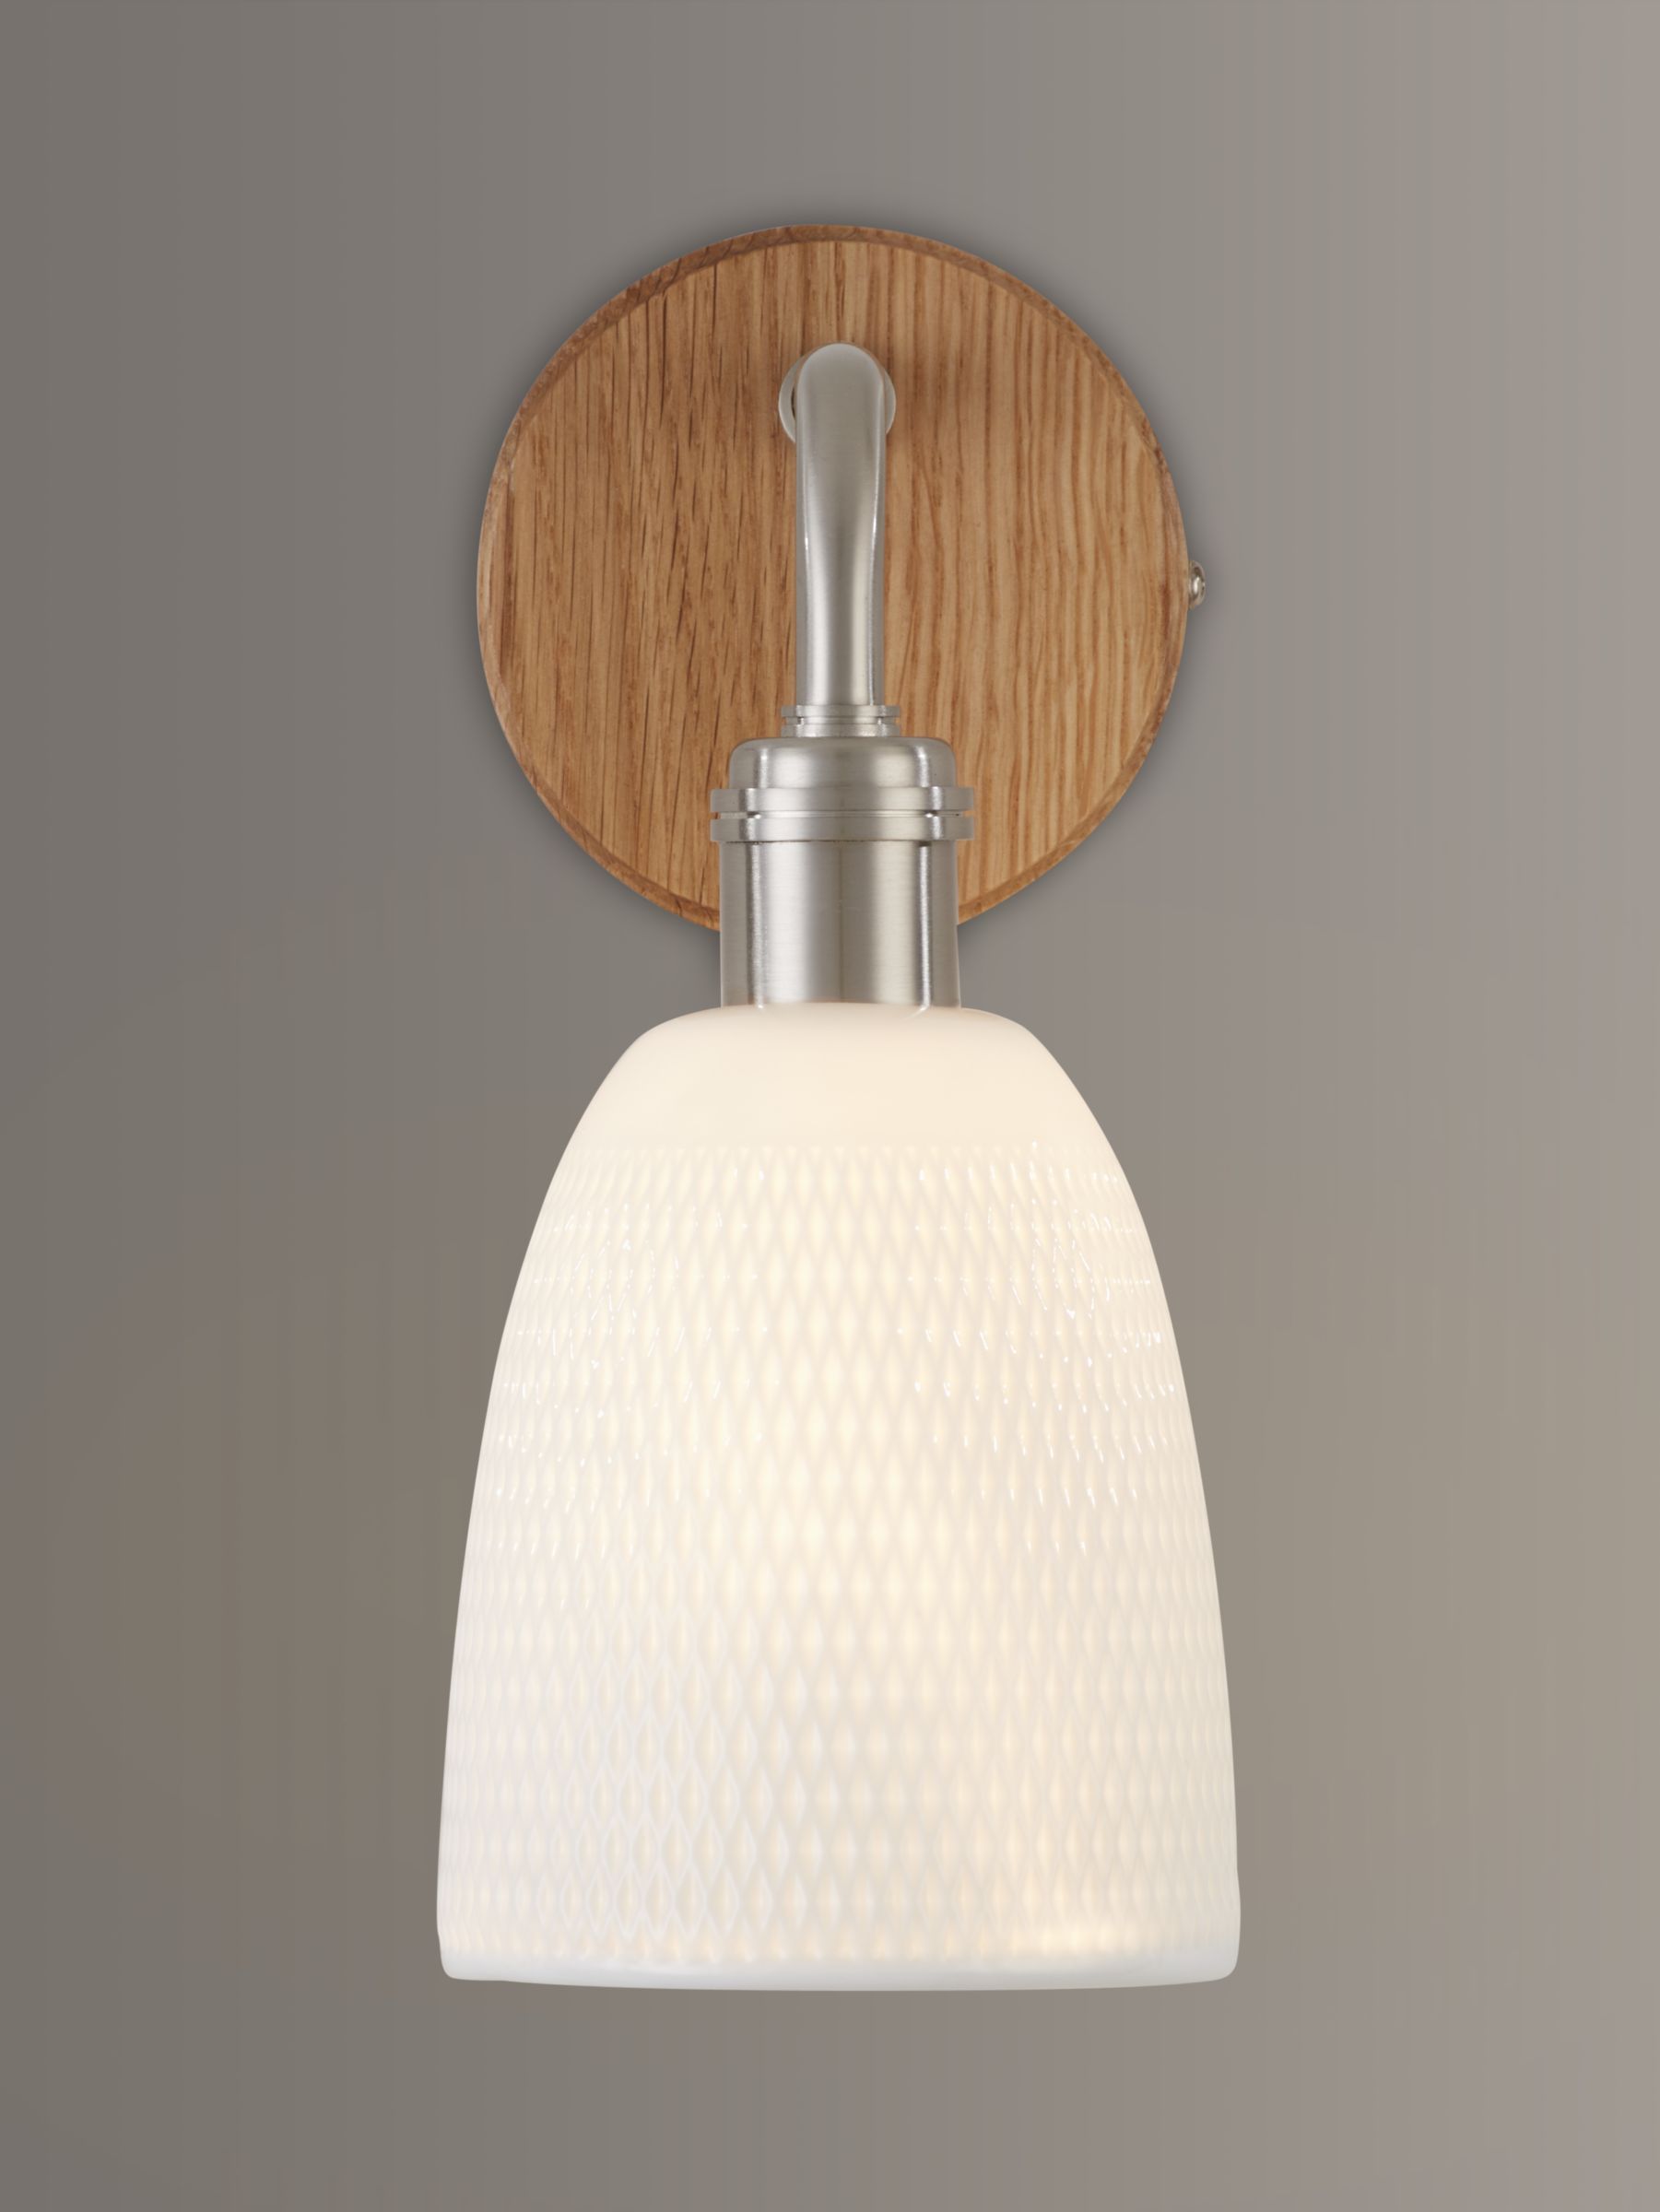 Photo of John lewis fitcham wood and ceramic wall light white